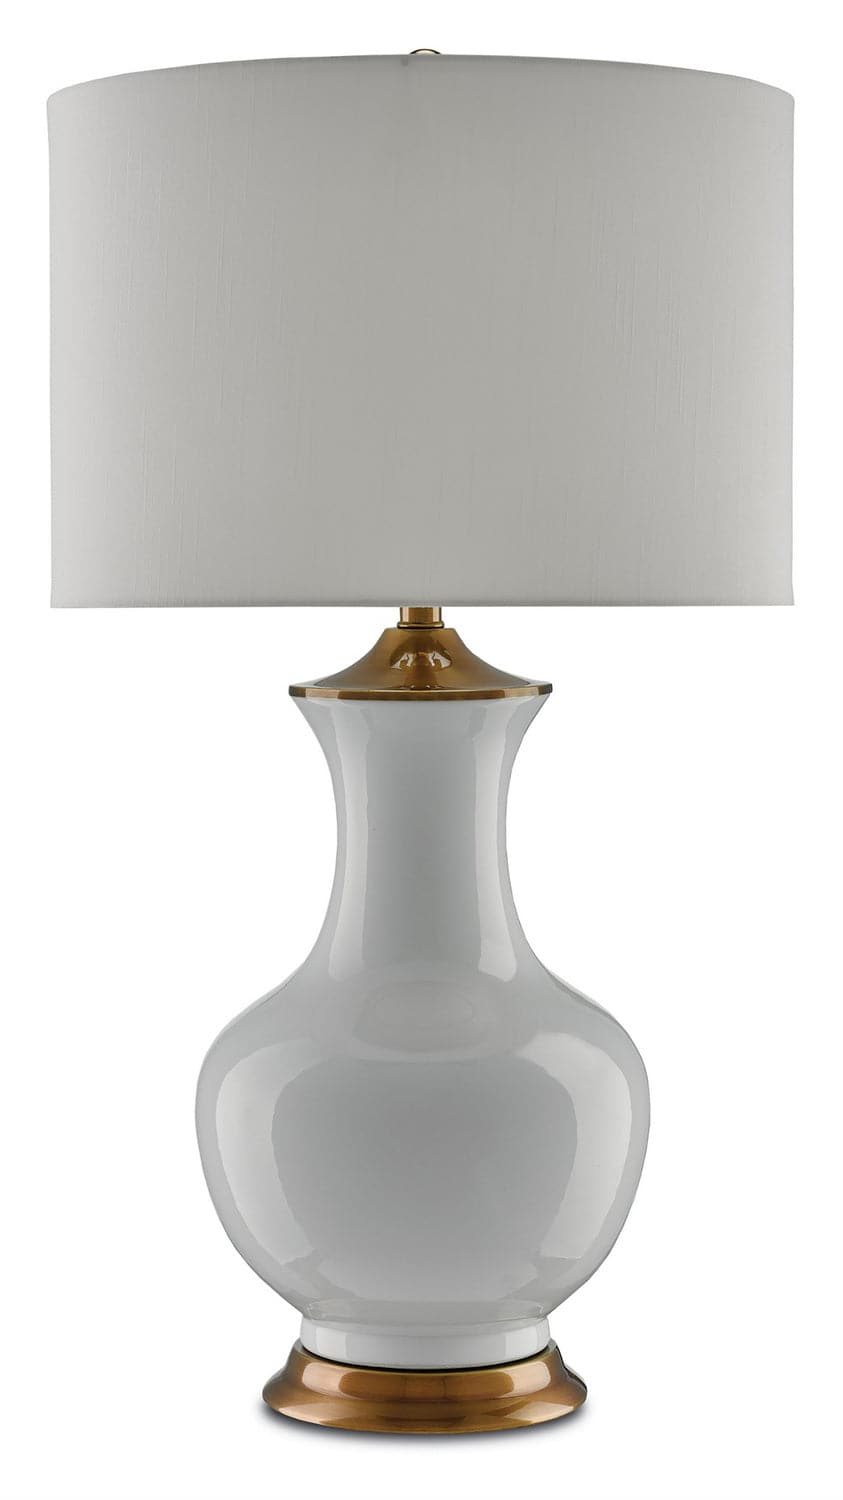 One Light Table Lamp from the Lilou collection in White/Antique Brass finish